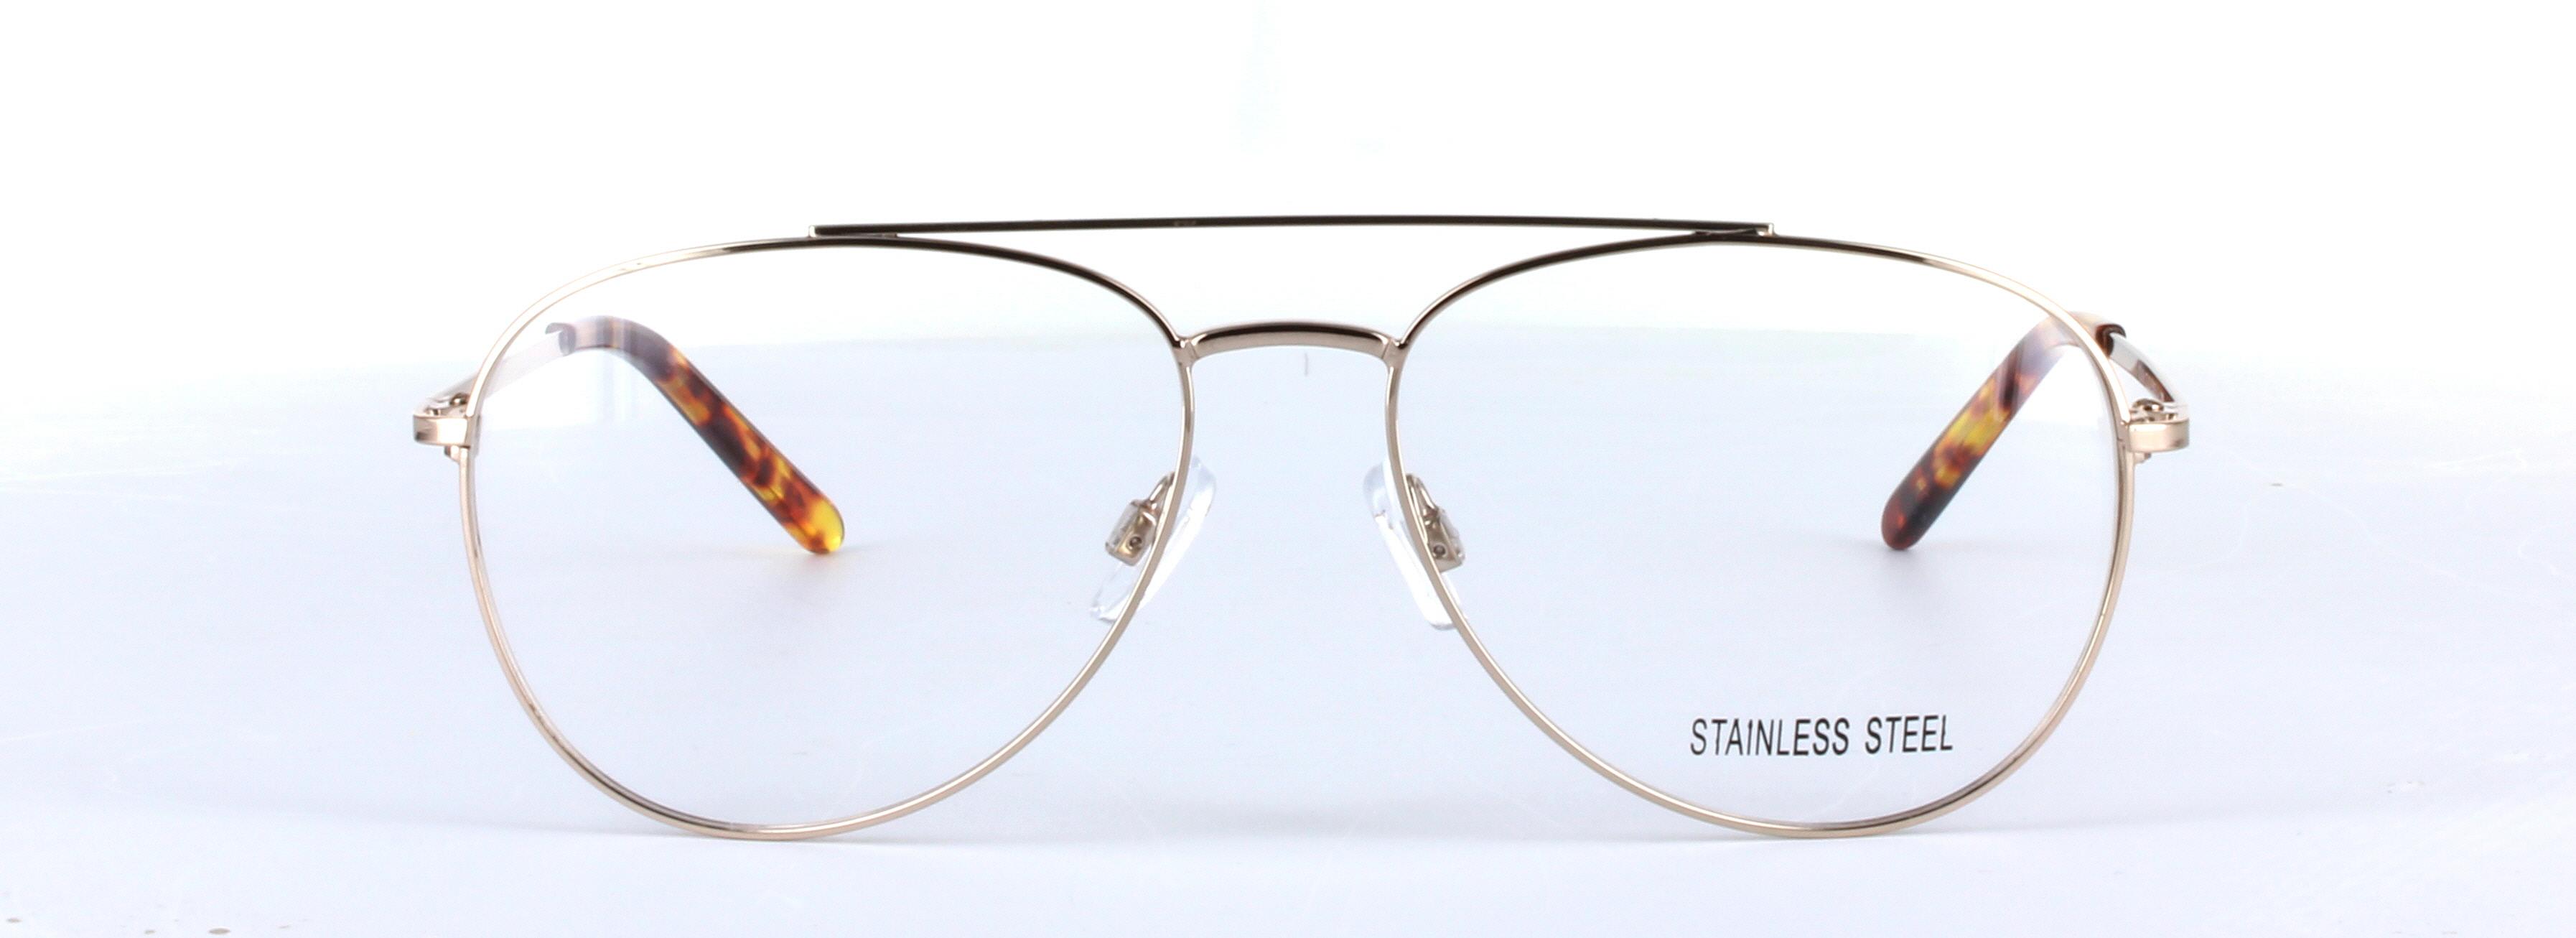 Gianni Gold Full Rim Oval Metal Glasses - Image View 5